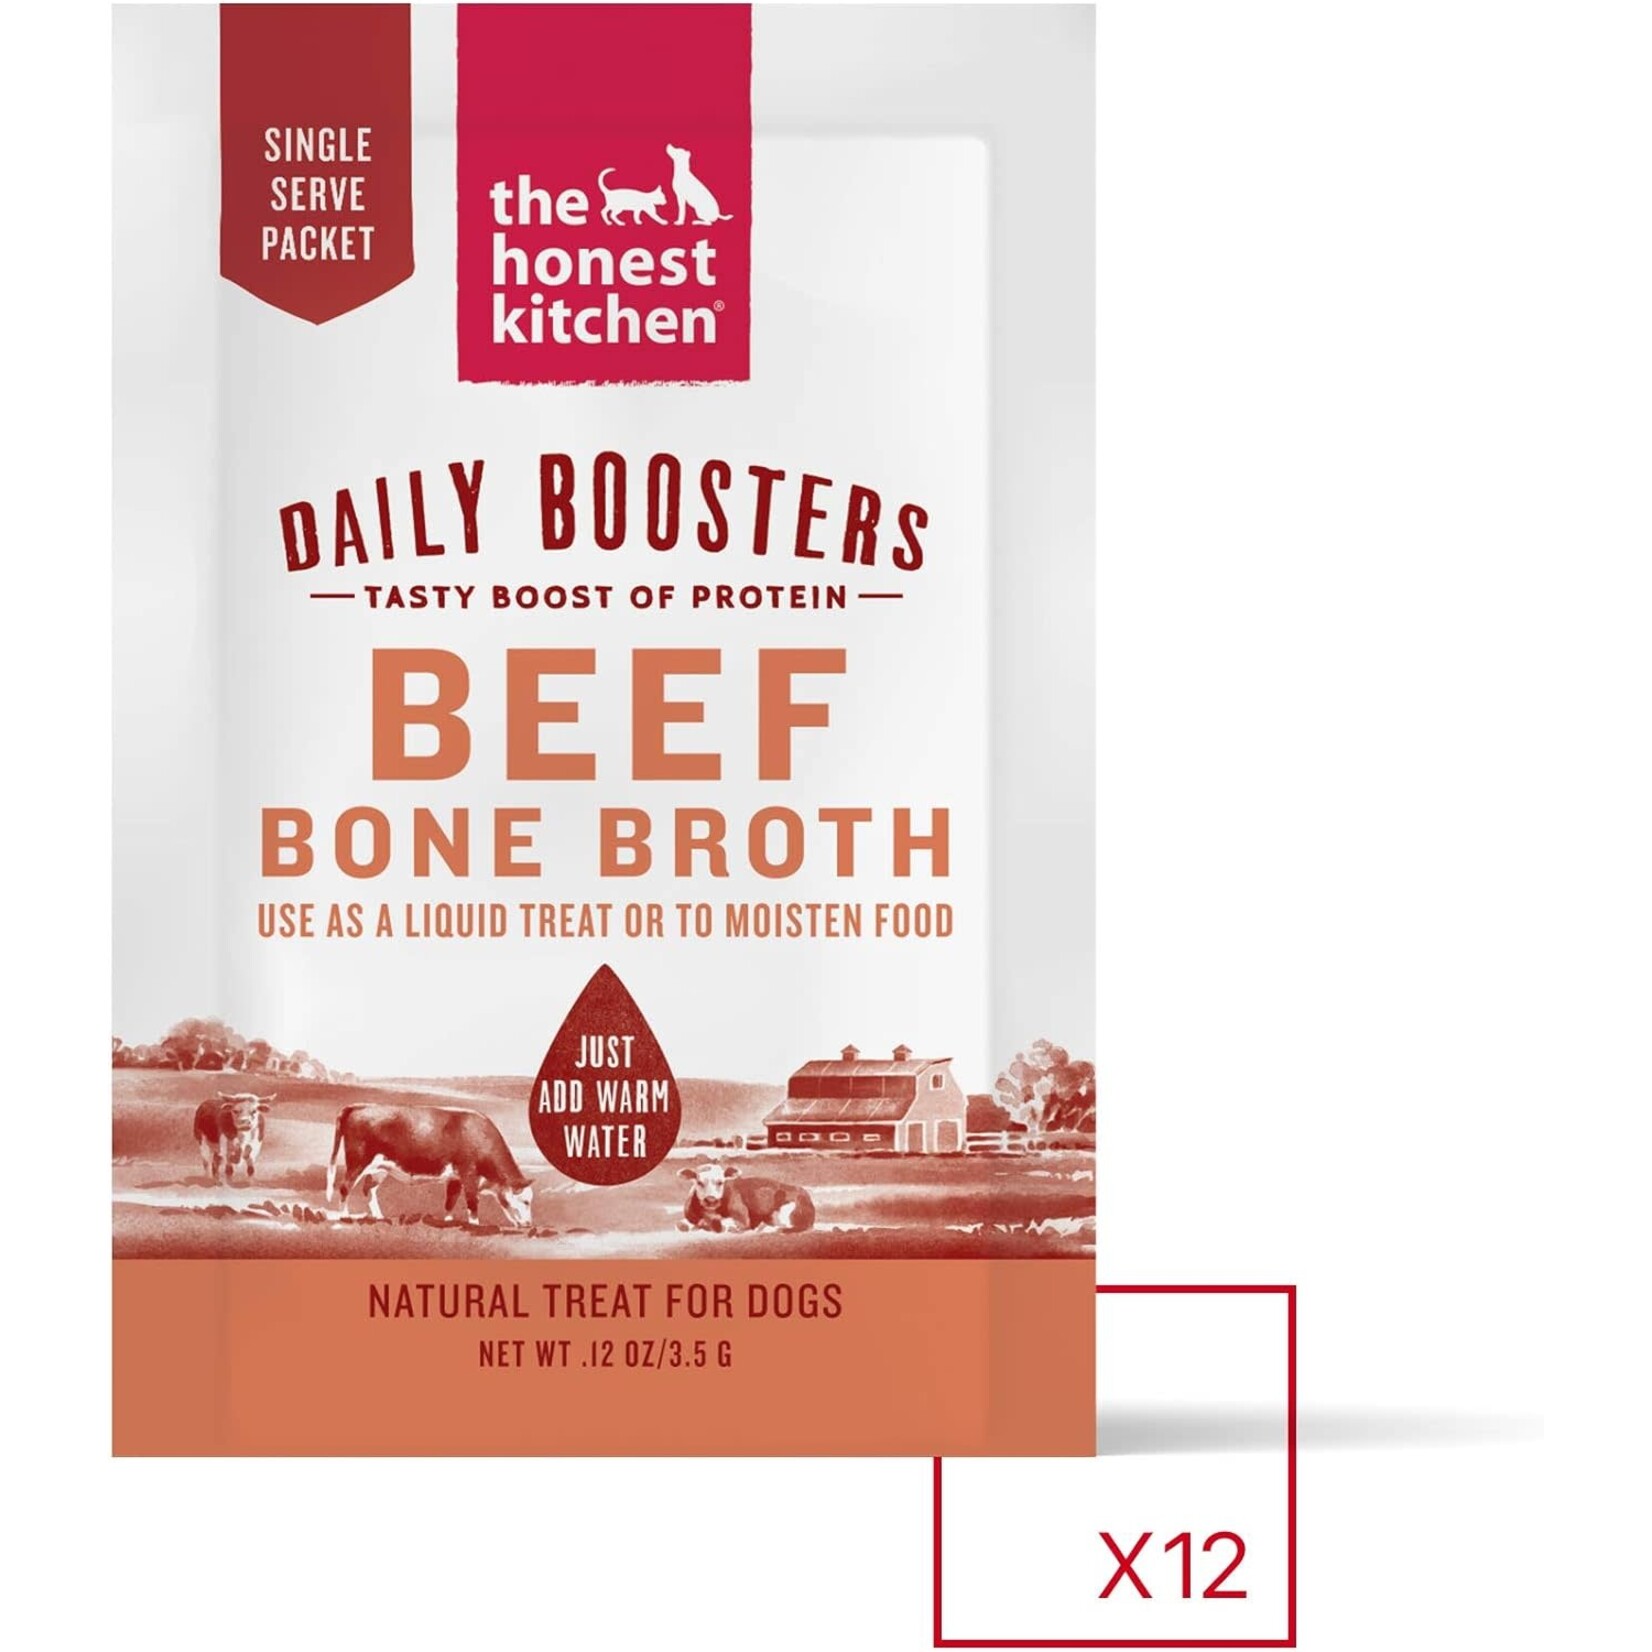 Honest Kitchen HK Daily Boosters Beef Bone Broth Box 12/3.5g